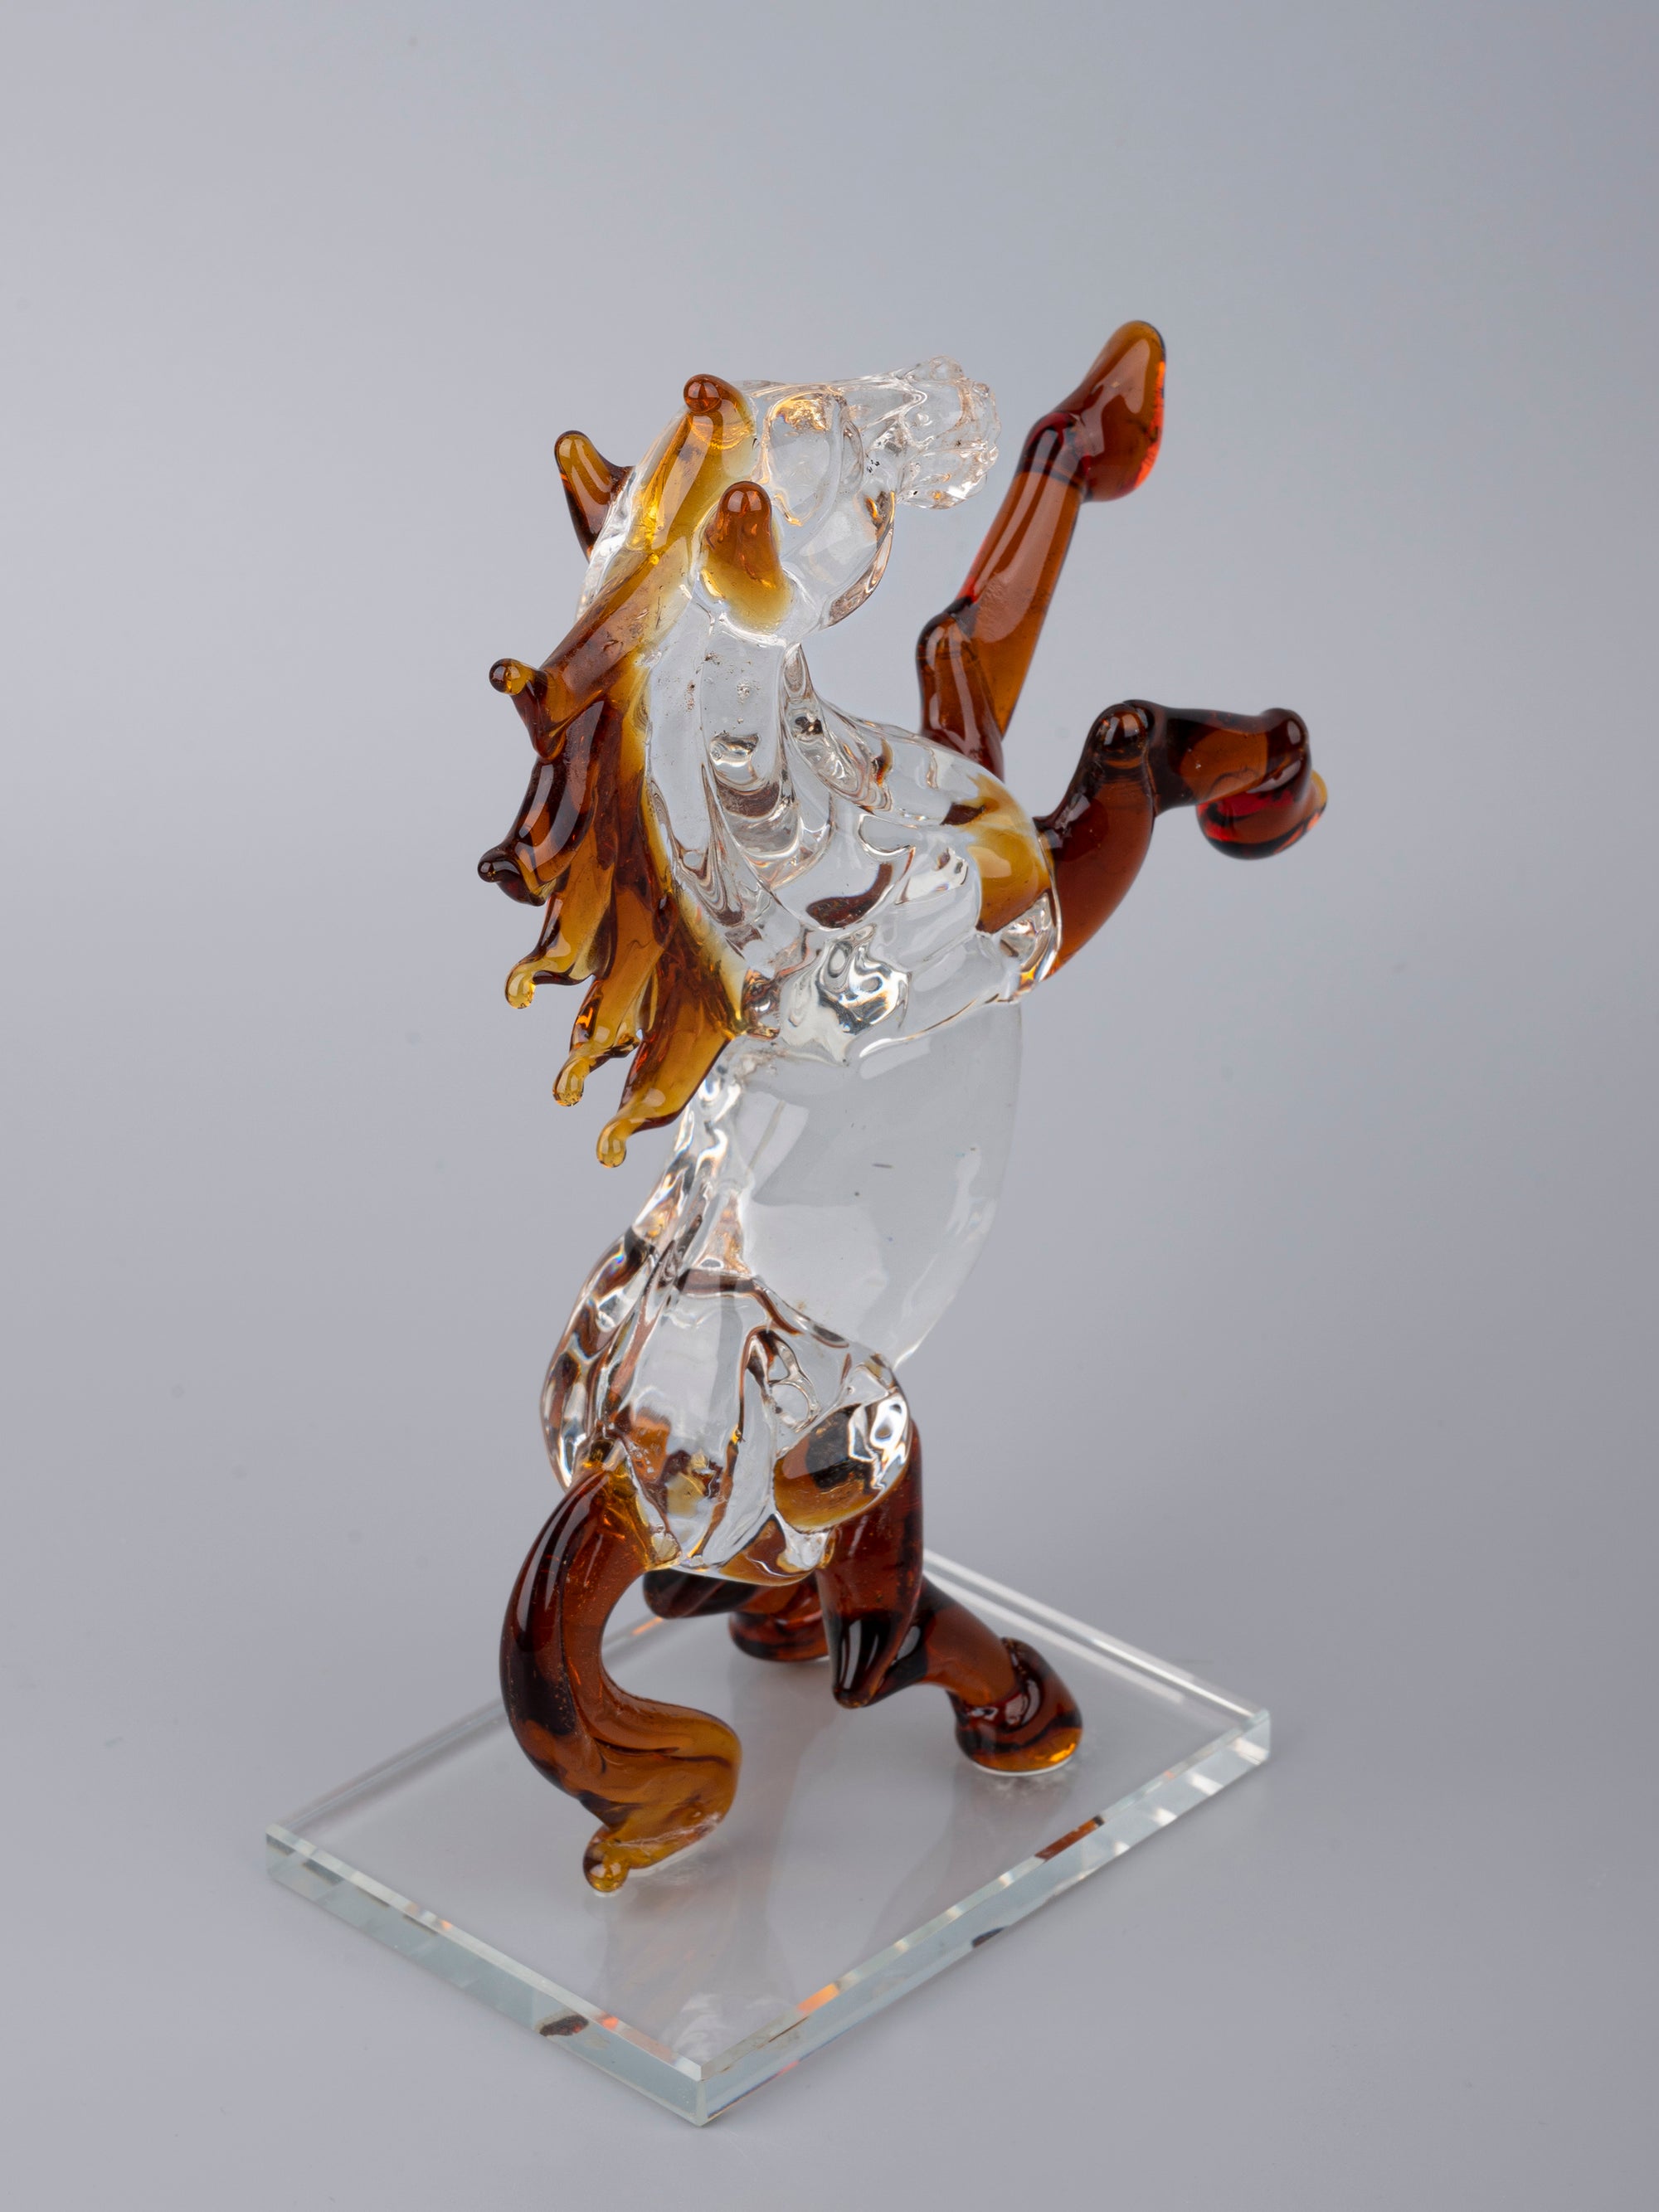 Prancing Horse Glass Decor Showpiece - 7 inches height - The Heritage Artifacts